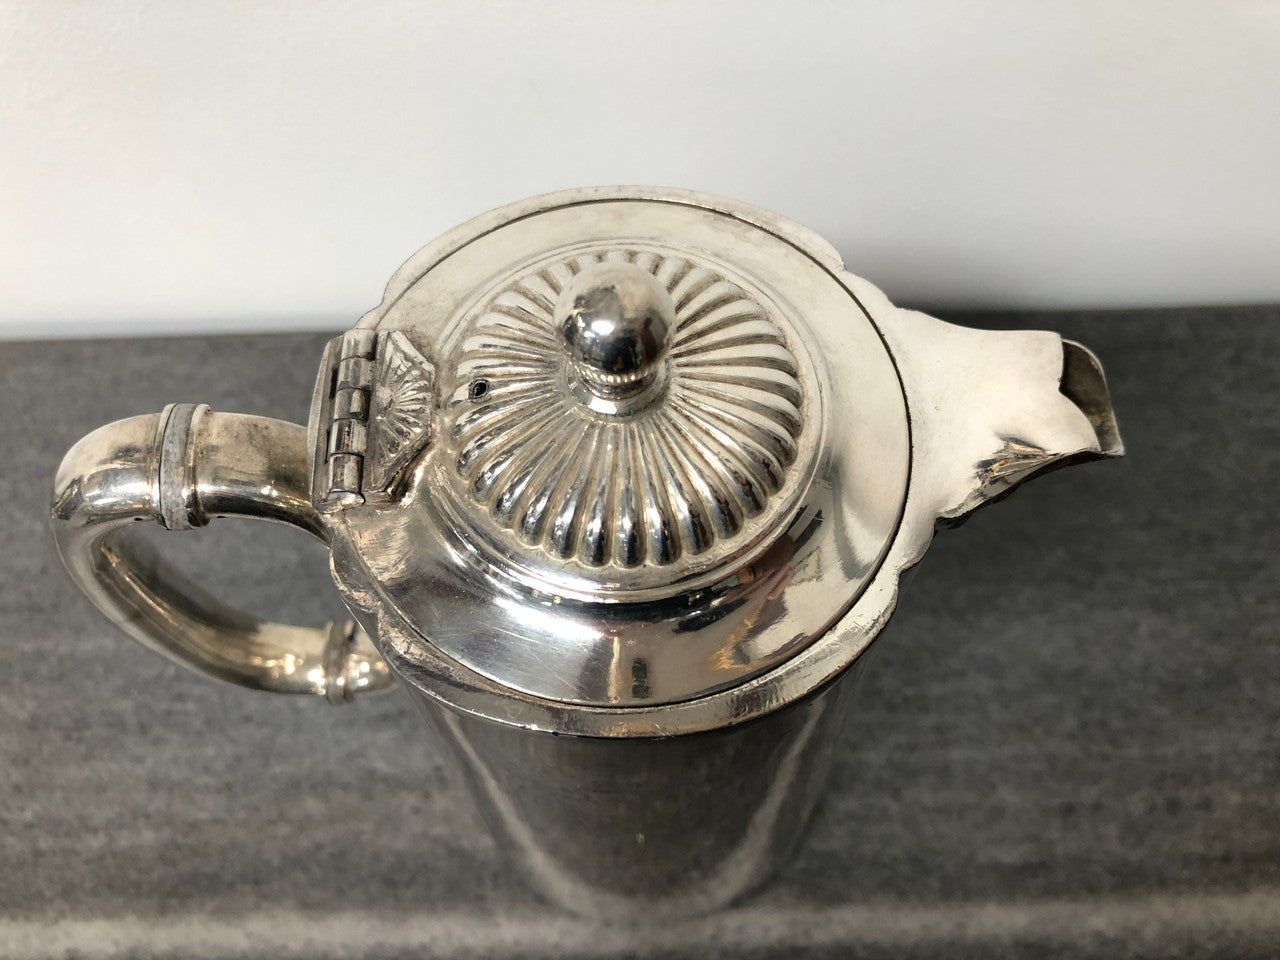 “James Dixon” Silver Plated Coffee Pot